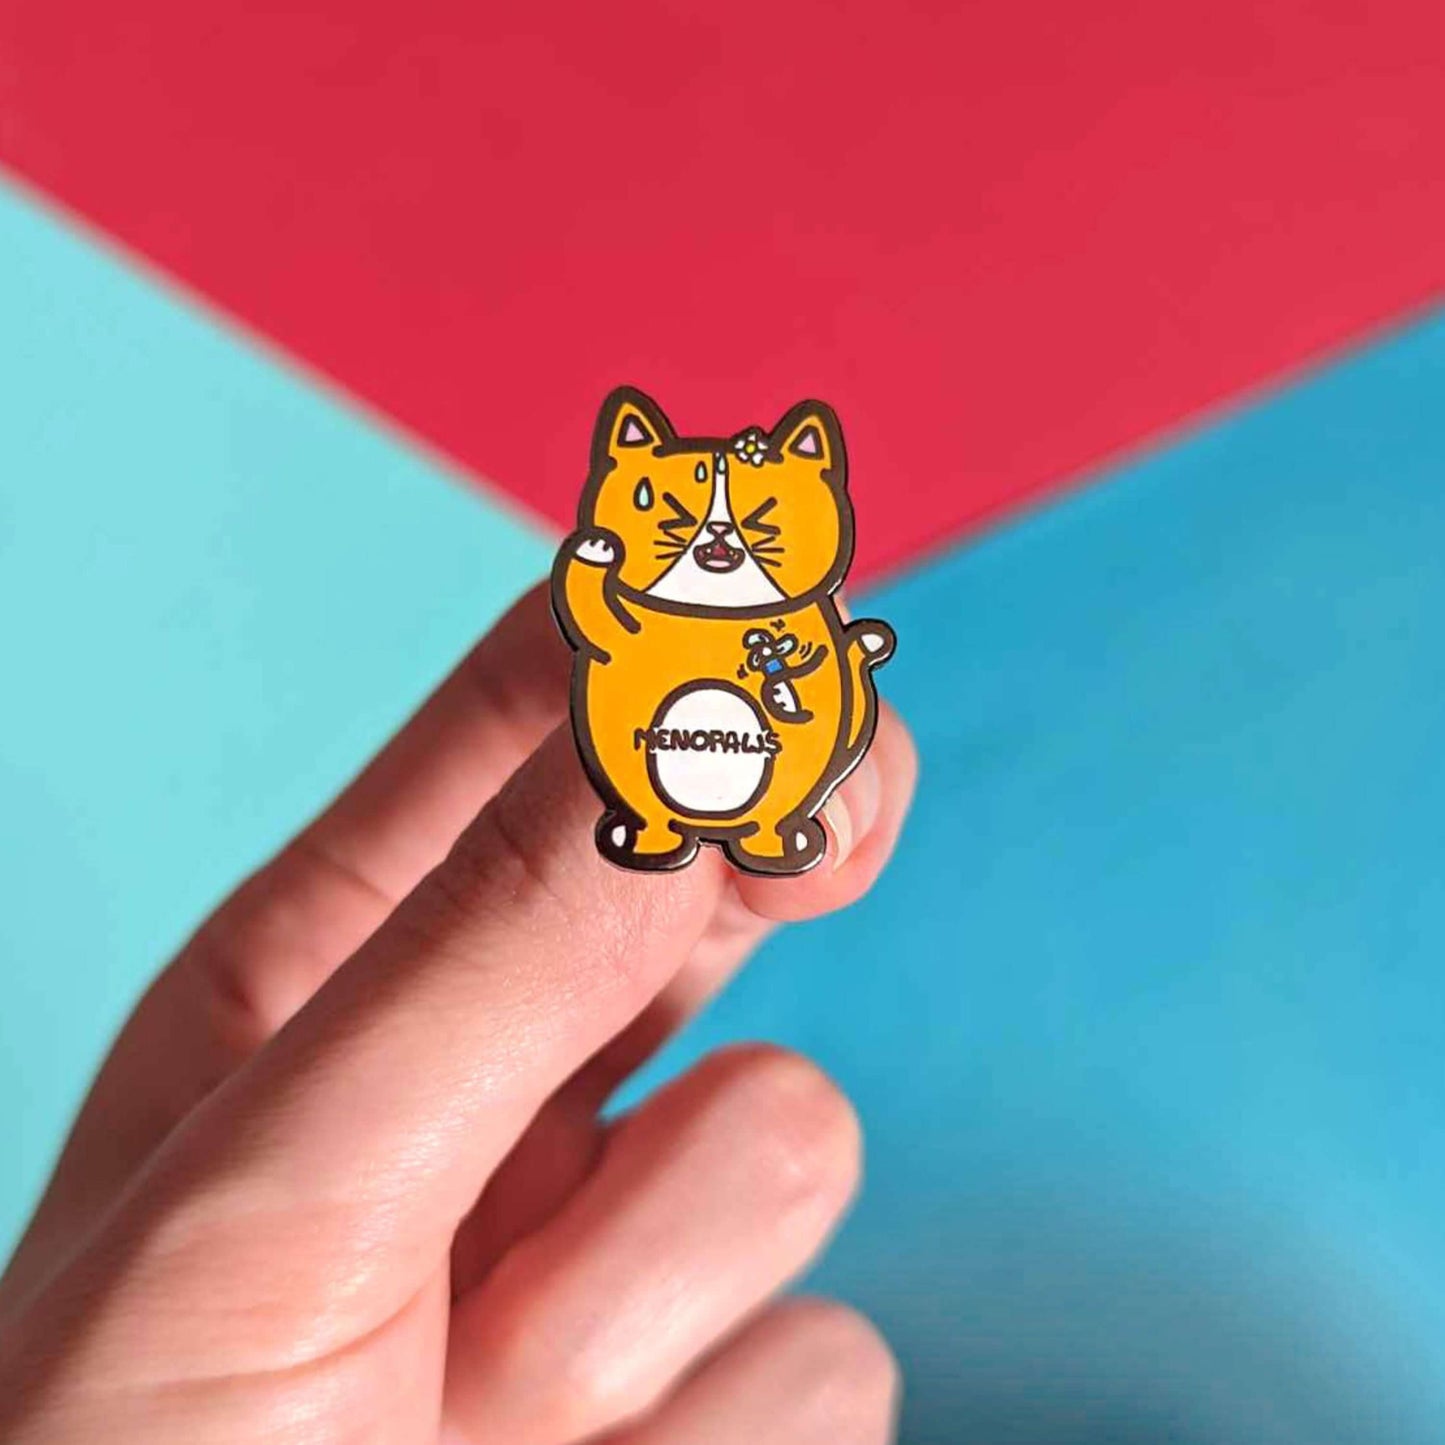 Menopaws Enamel Pin - Menopause held in front of a red and blue background. The enamel pin is of a menopausal ginger and white cat with a daisy in it's hair. The cat is holding an electric fan and is looking hot with sweat droplets on it's face. Hand drawn design made to raise awareness for menopause